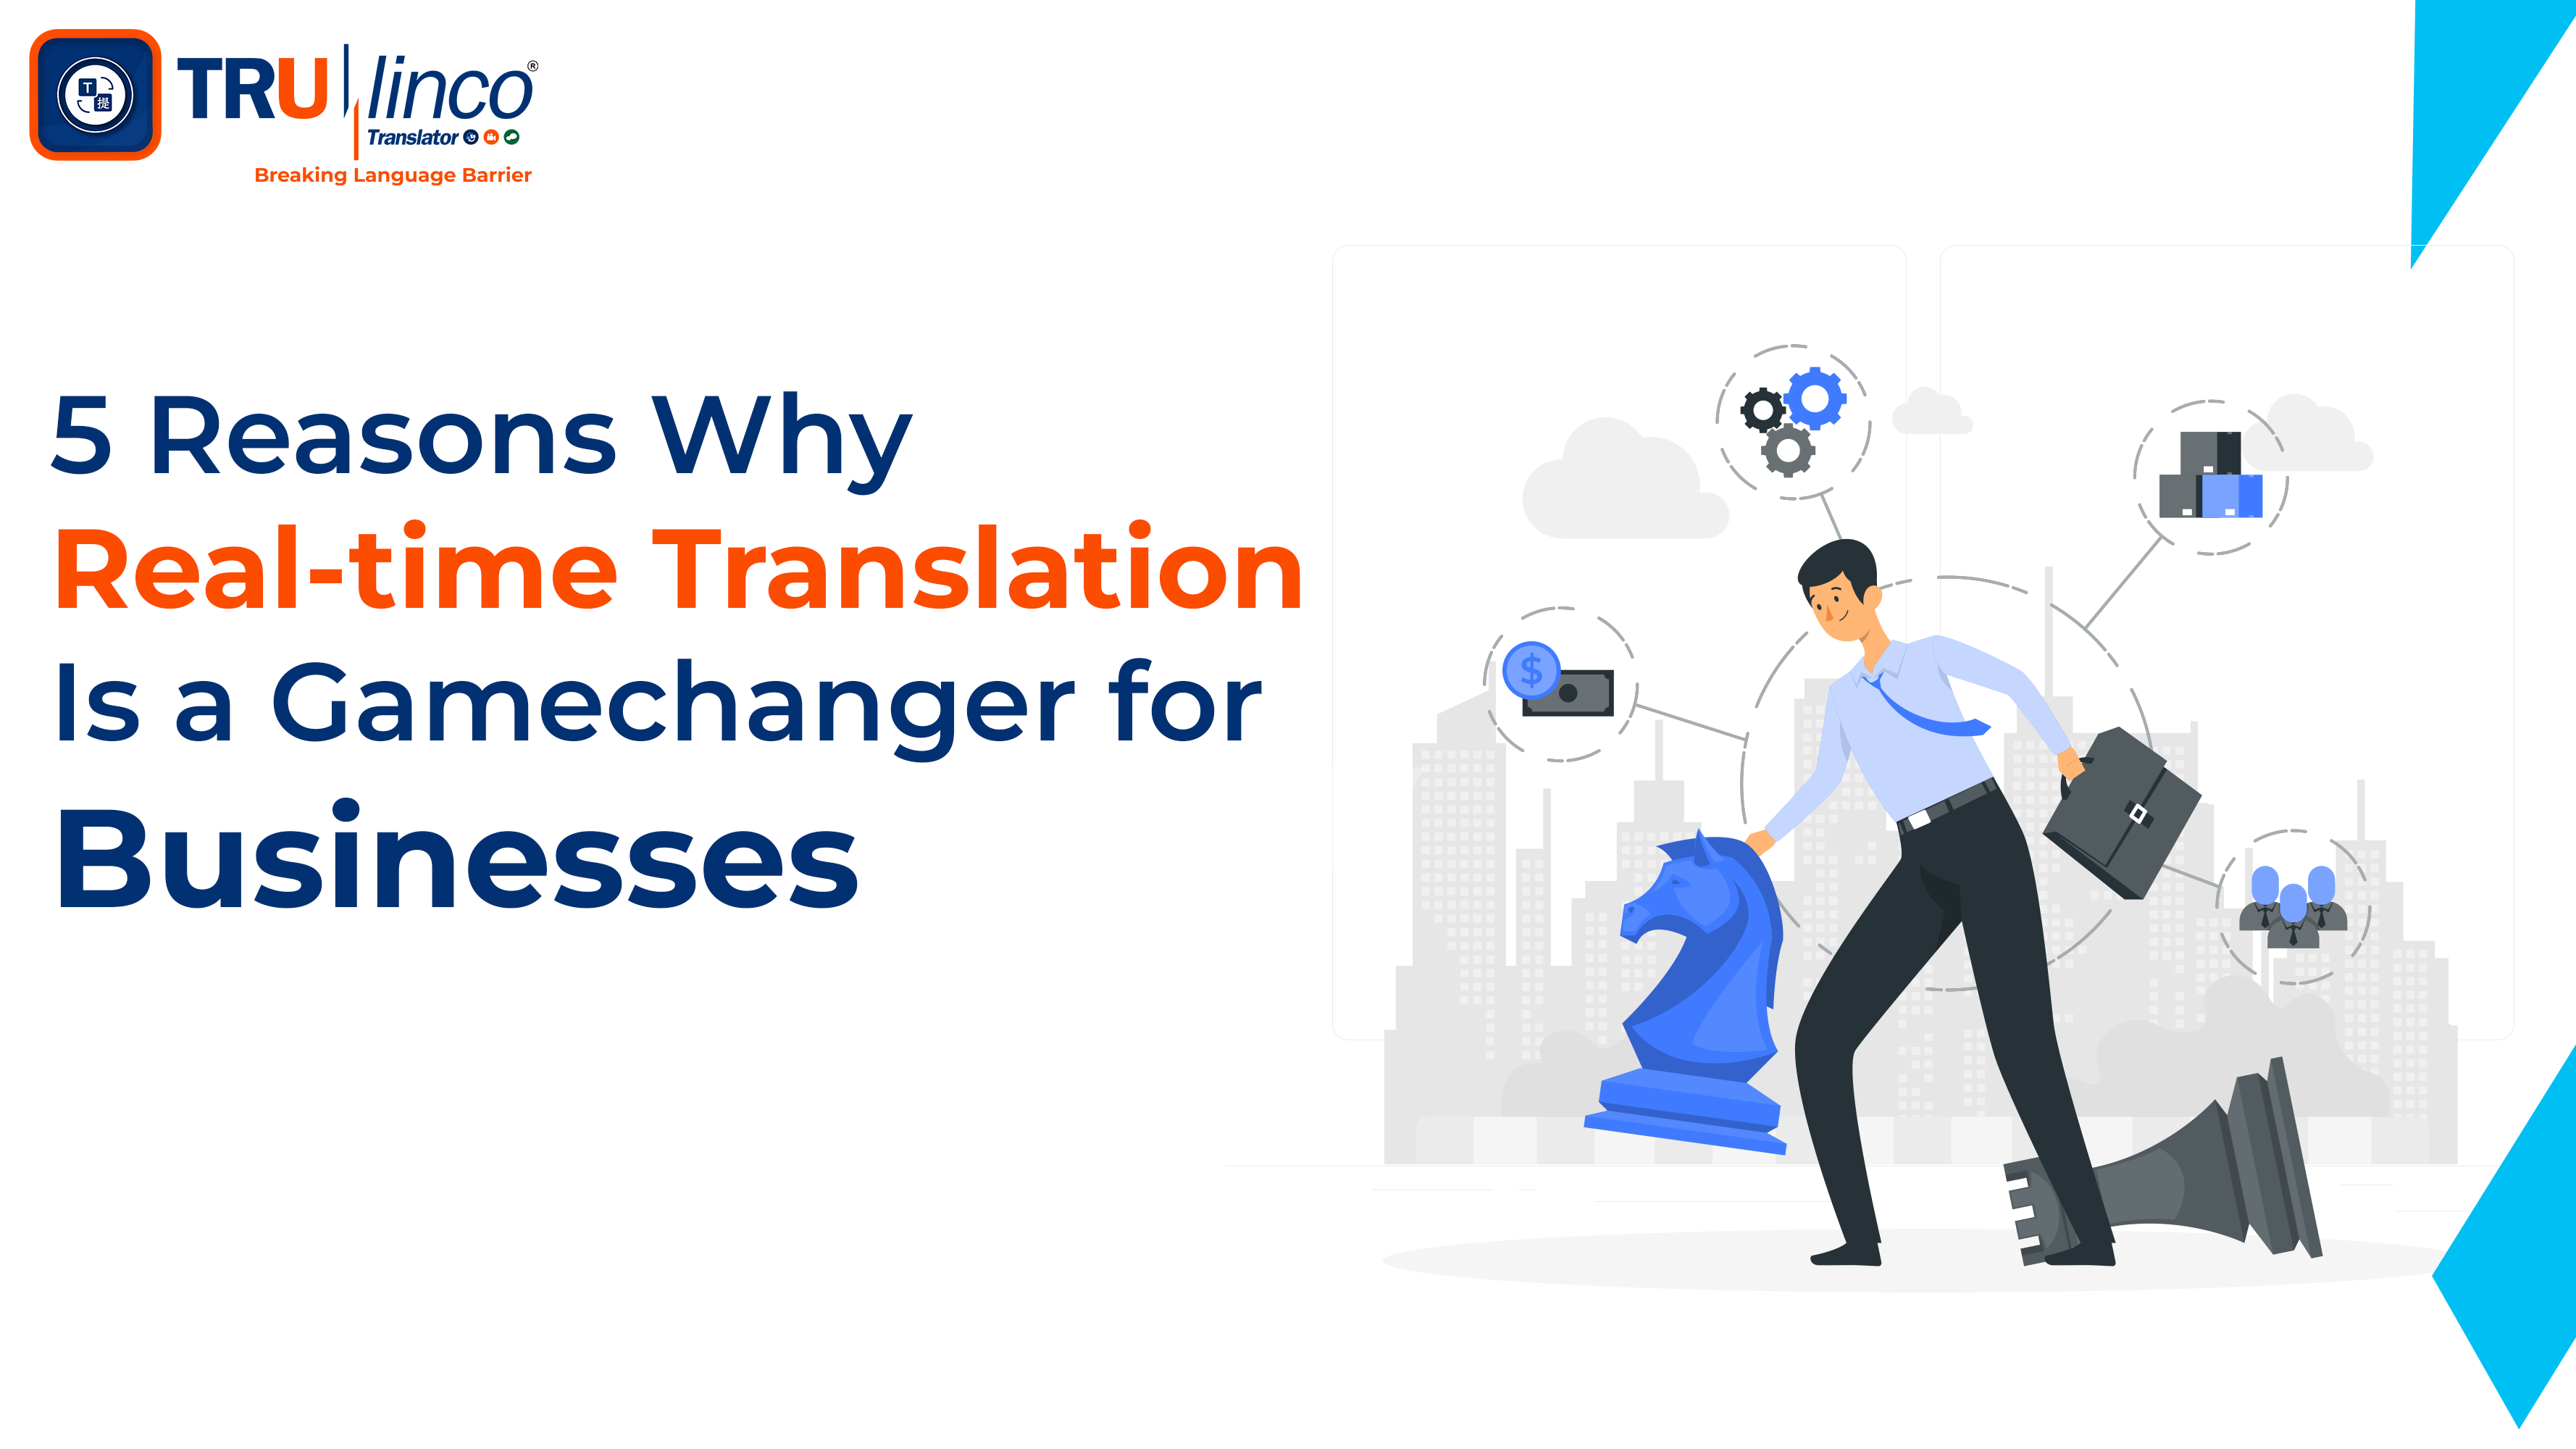 5 Reasons Why Real-time Translation is a Gamechanger for Businesses